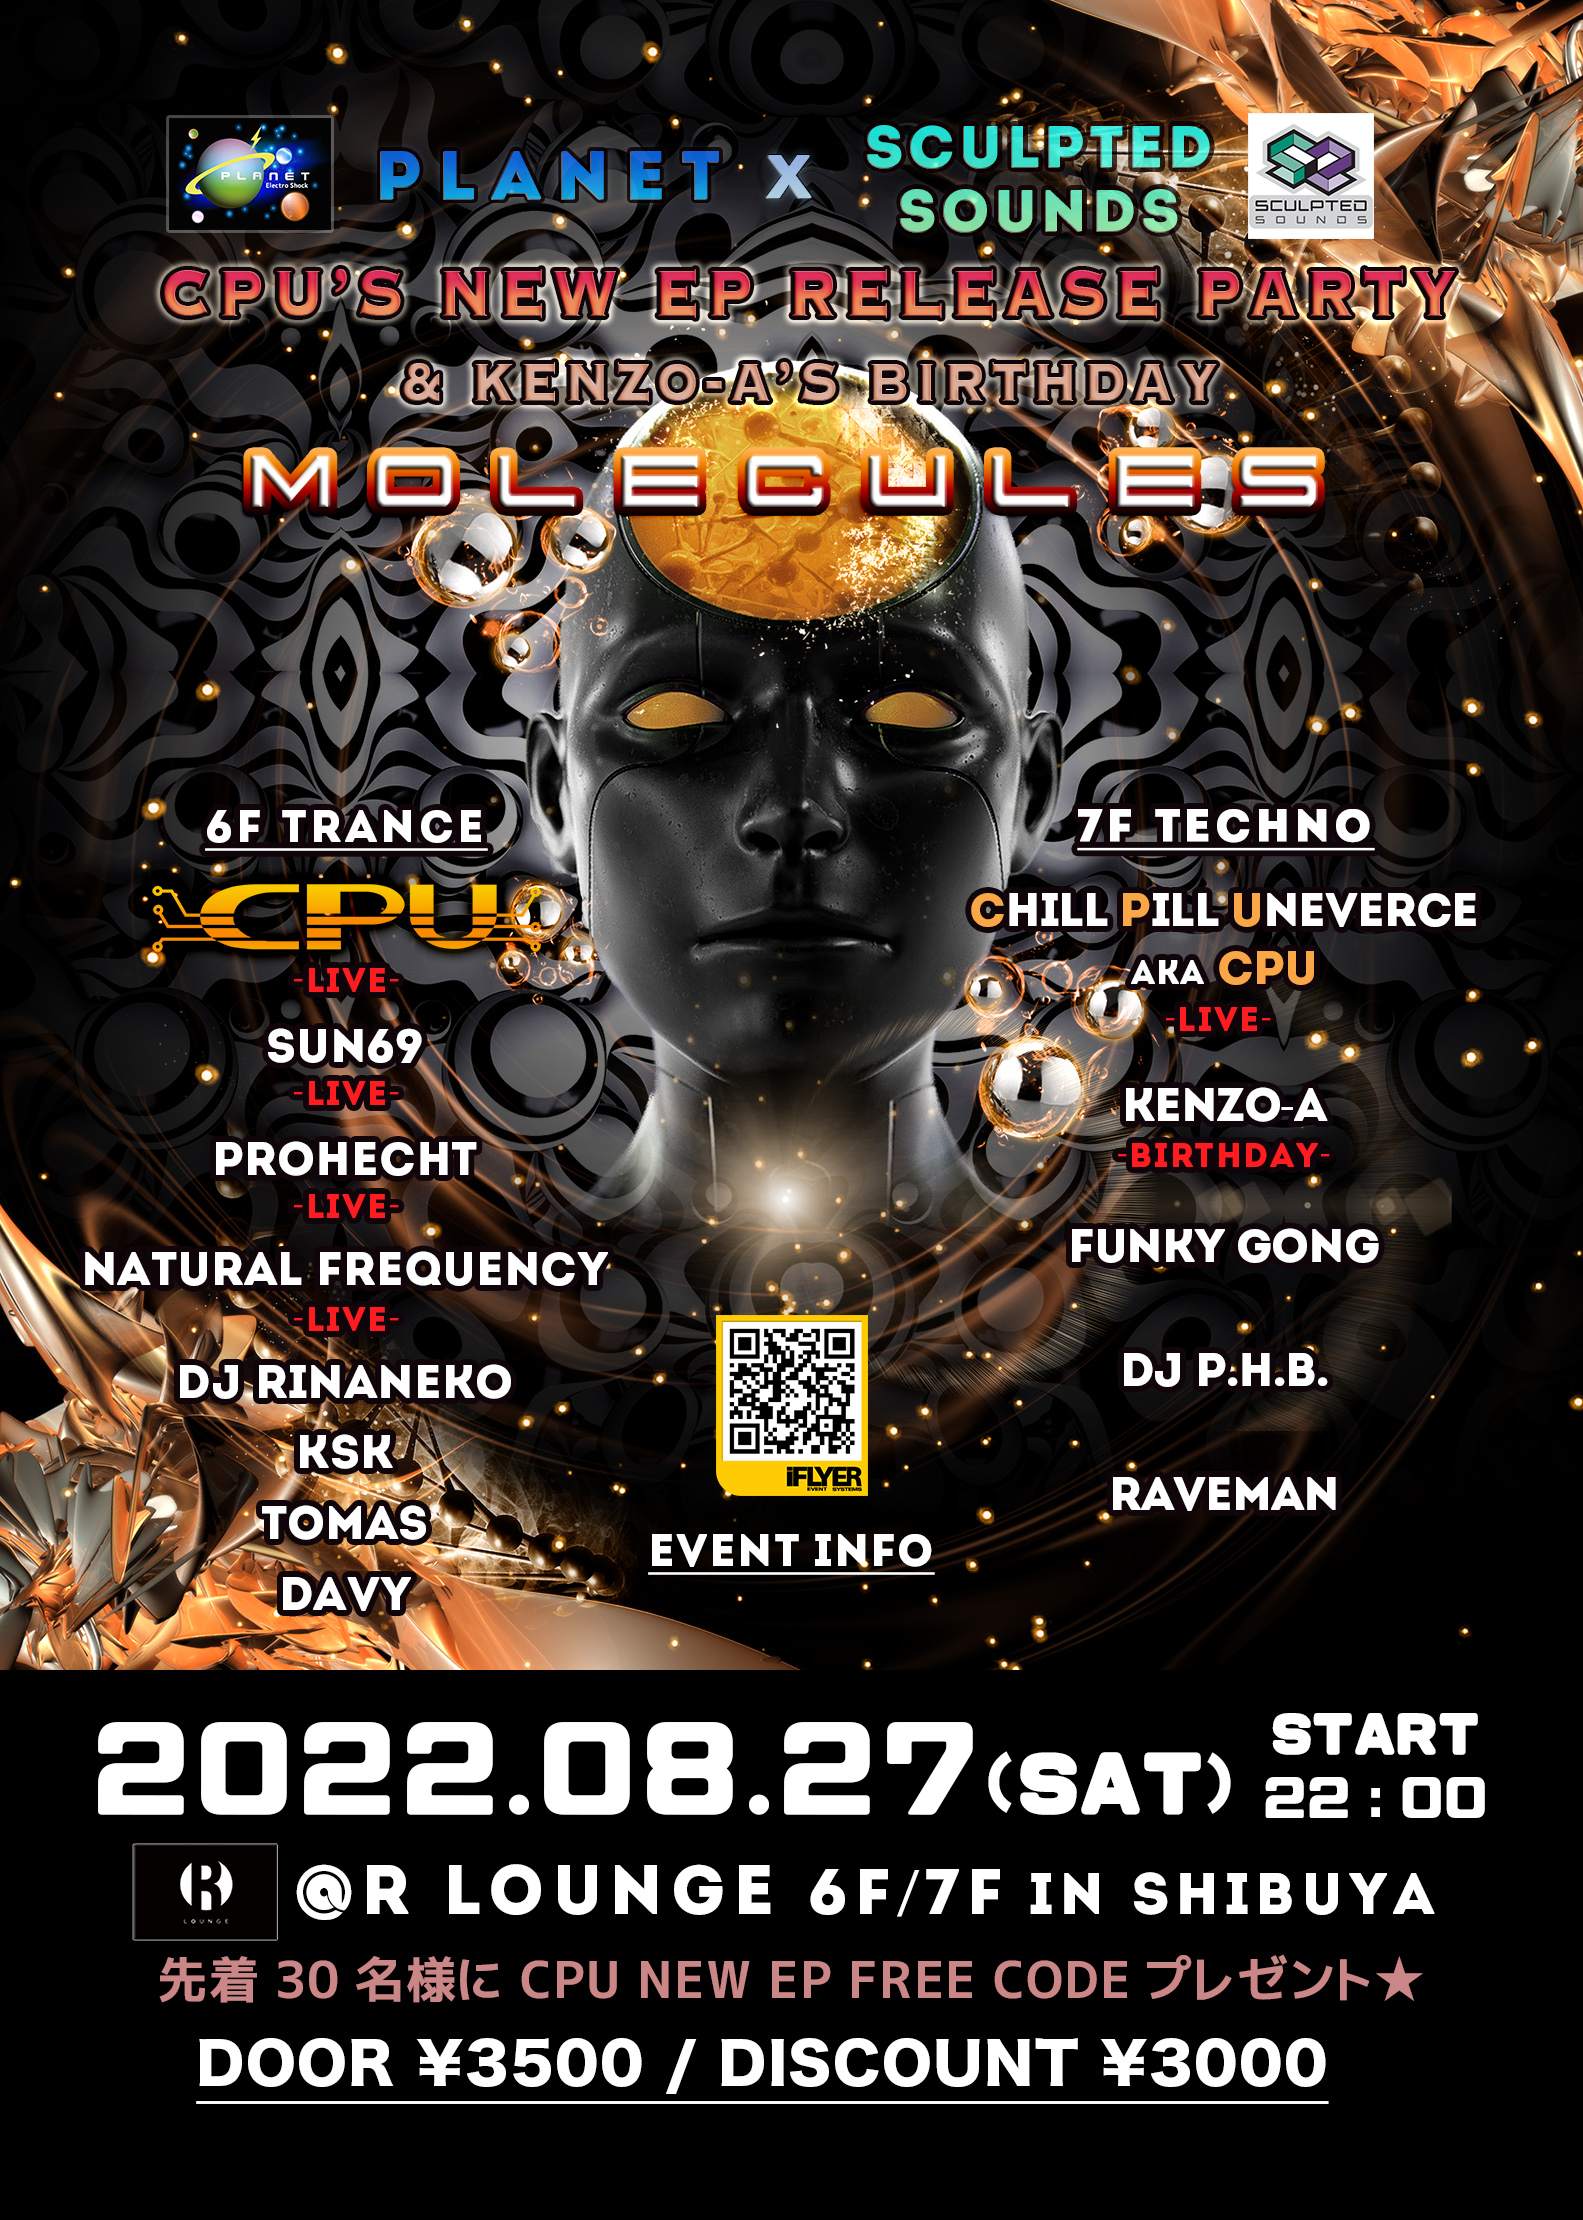 CPU New EP Release Party 'Molecules' organized by Planet x Sculpted Sounds - Página trasera